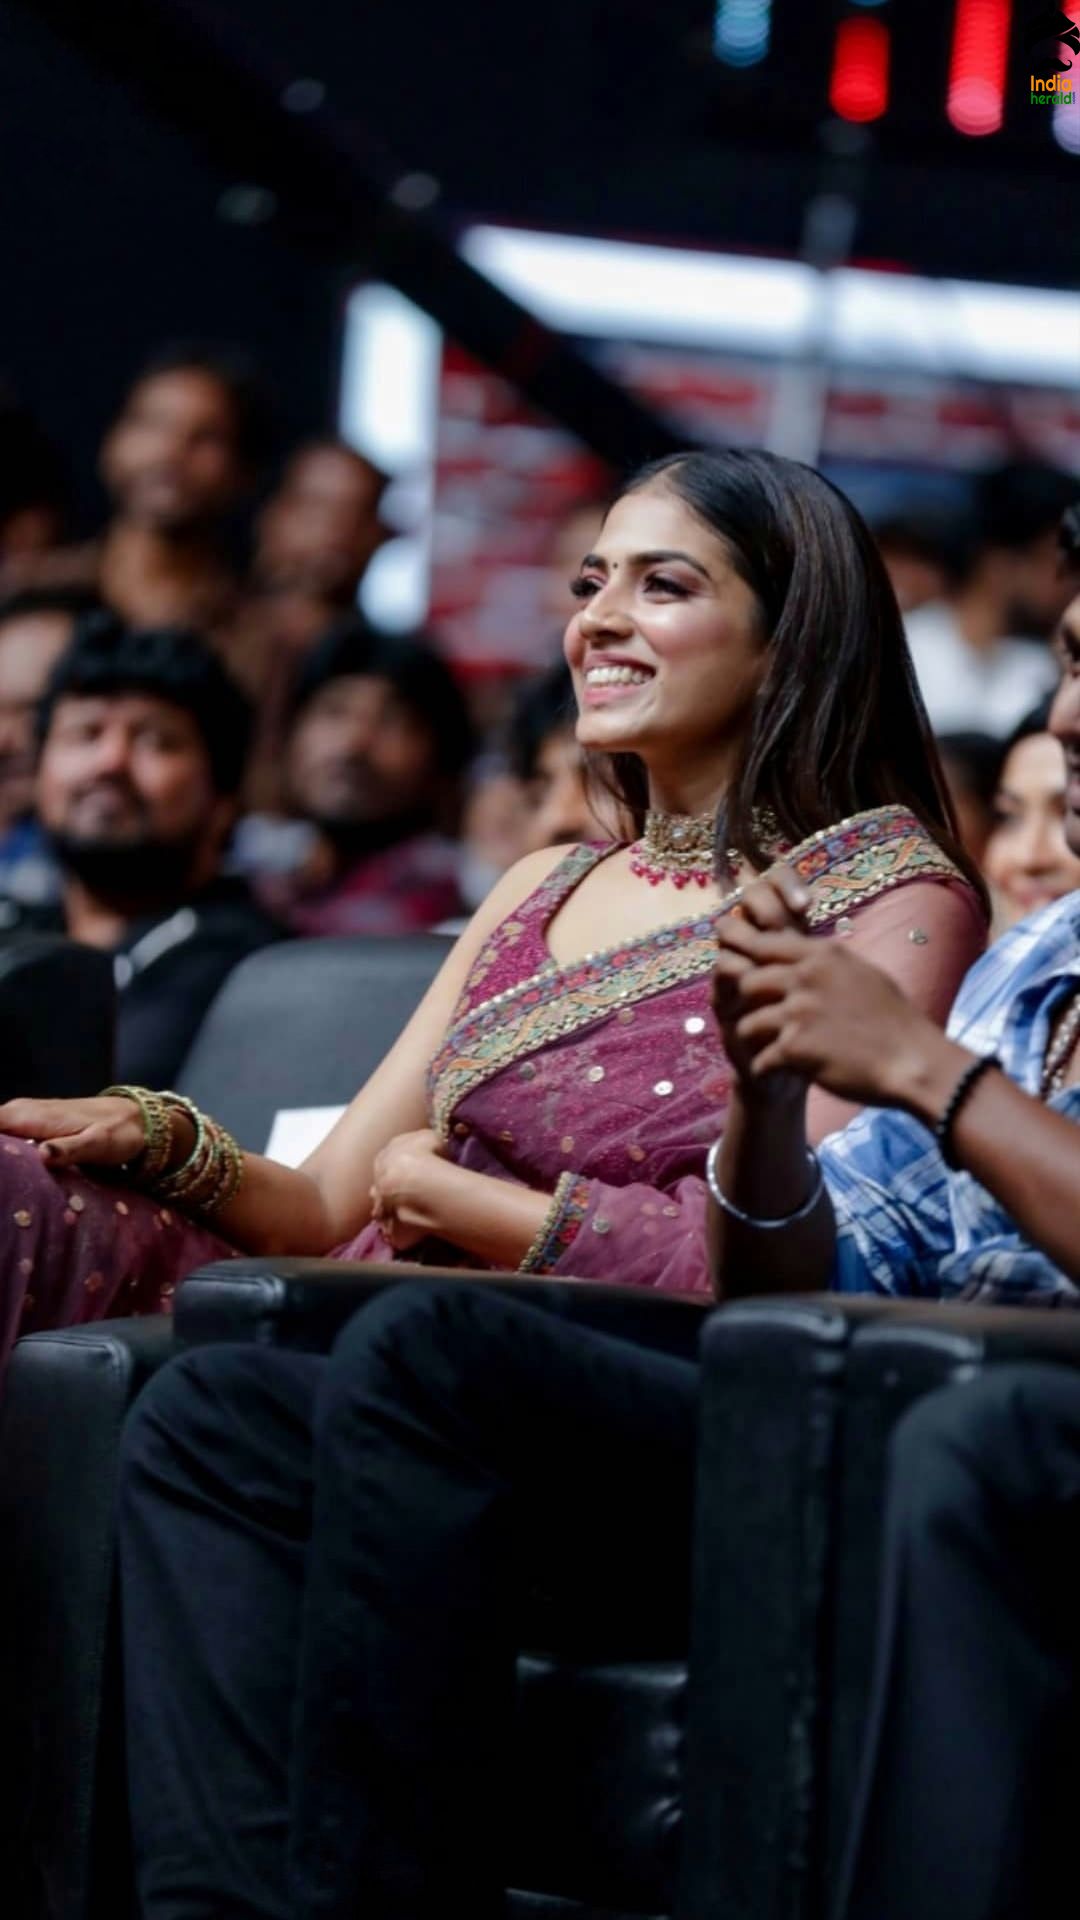 Few More Hot Clicks of Malavika Mohanan from the Audio Launch